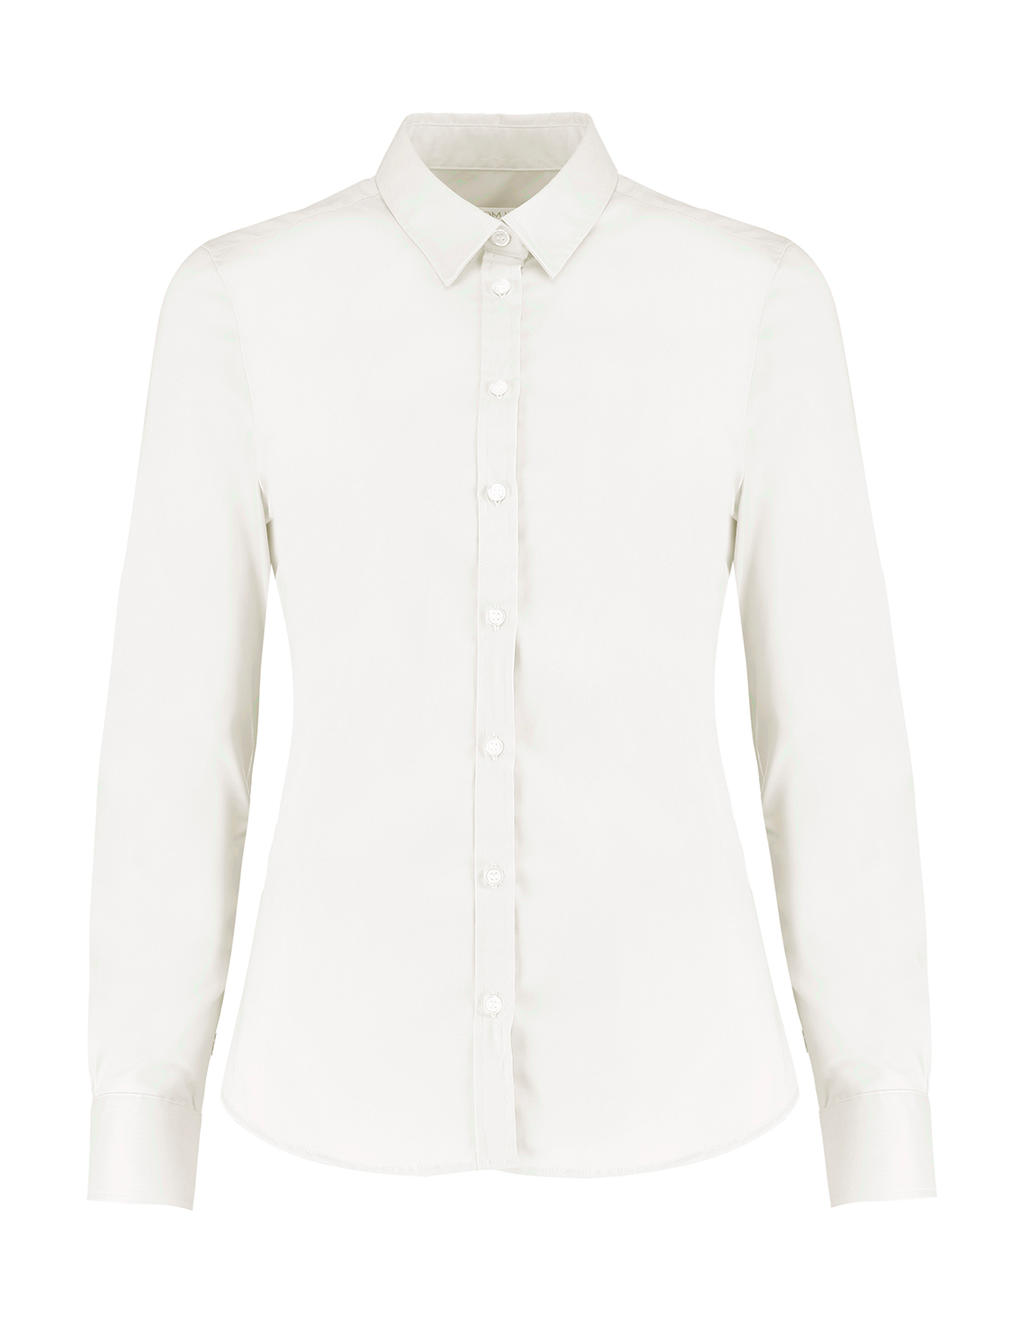  Womens Tailored Fit Stretch Oxford Shirt LS in Farbe White